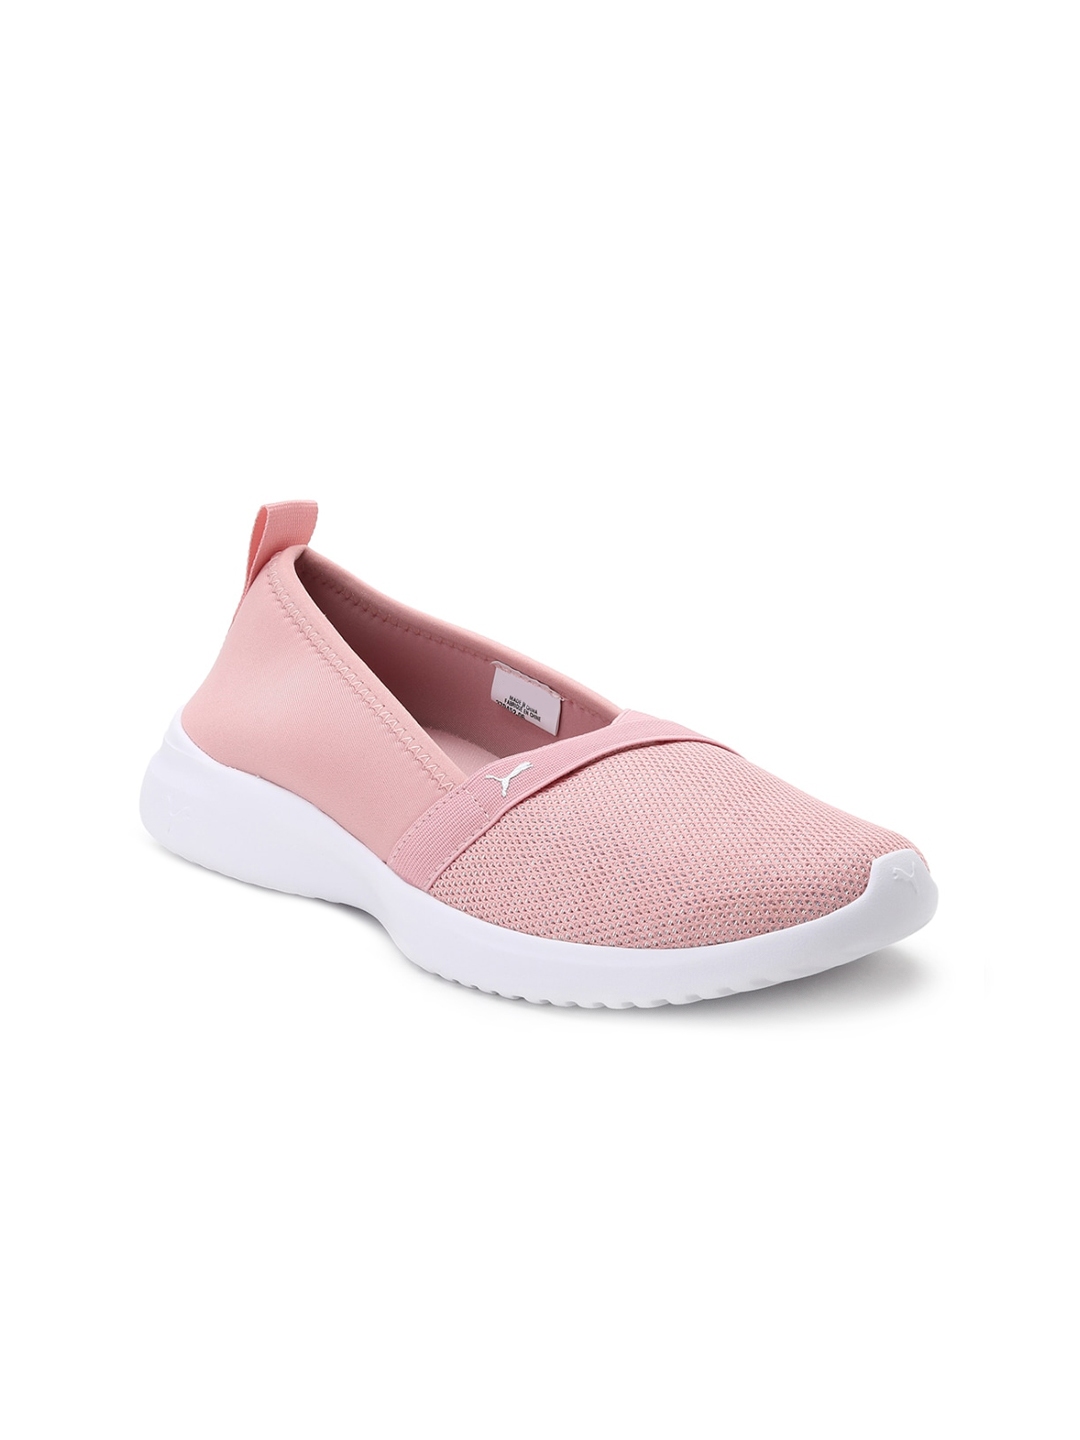 Buy Puma Women Pink Slip On Sneakers - Casual Shoes for Women 14405558 ...